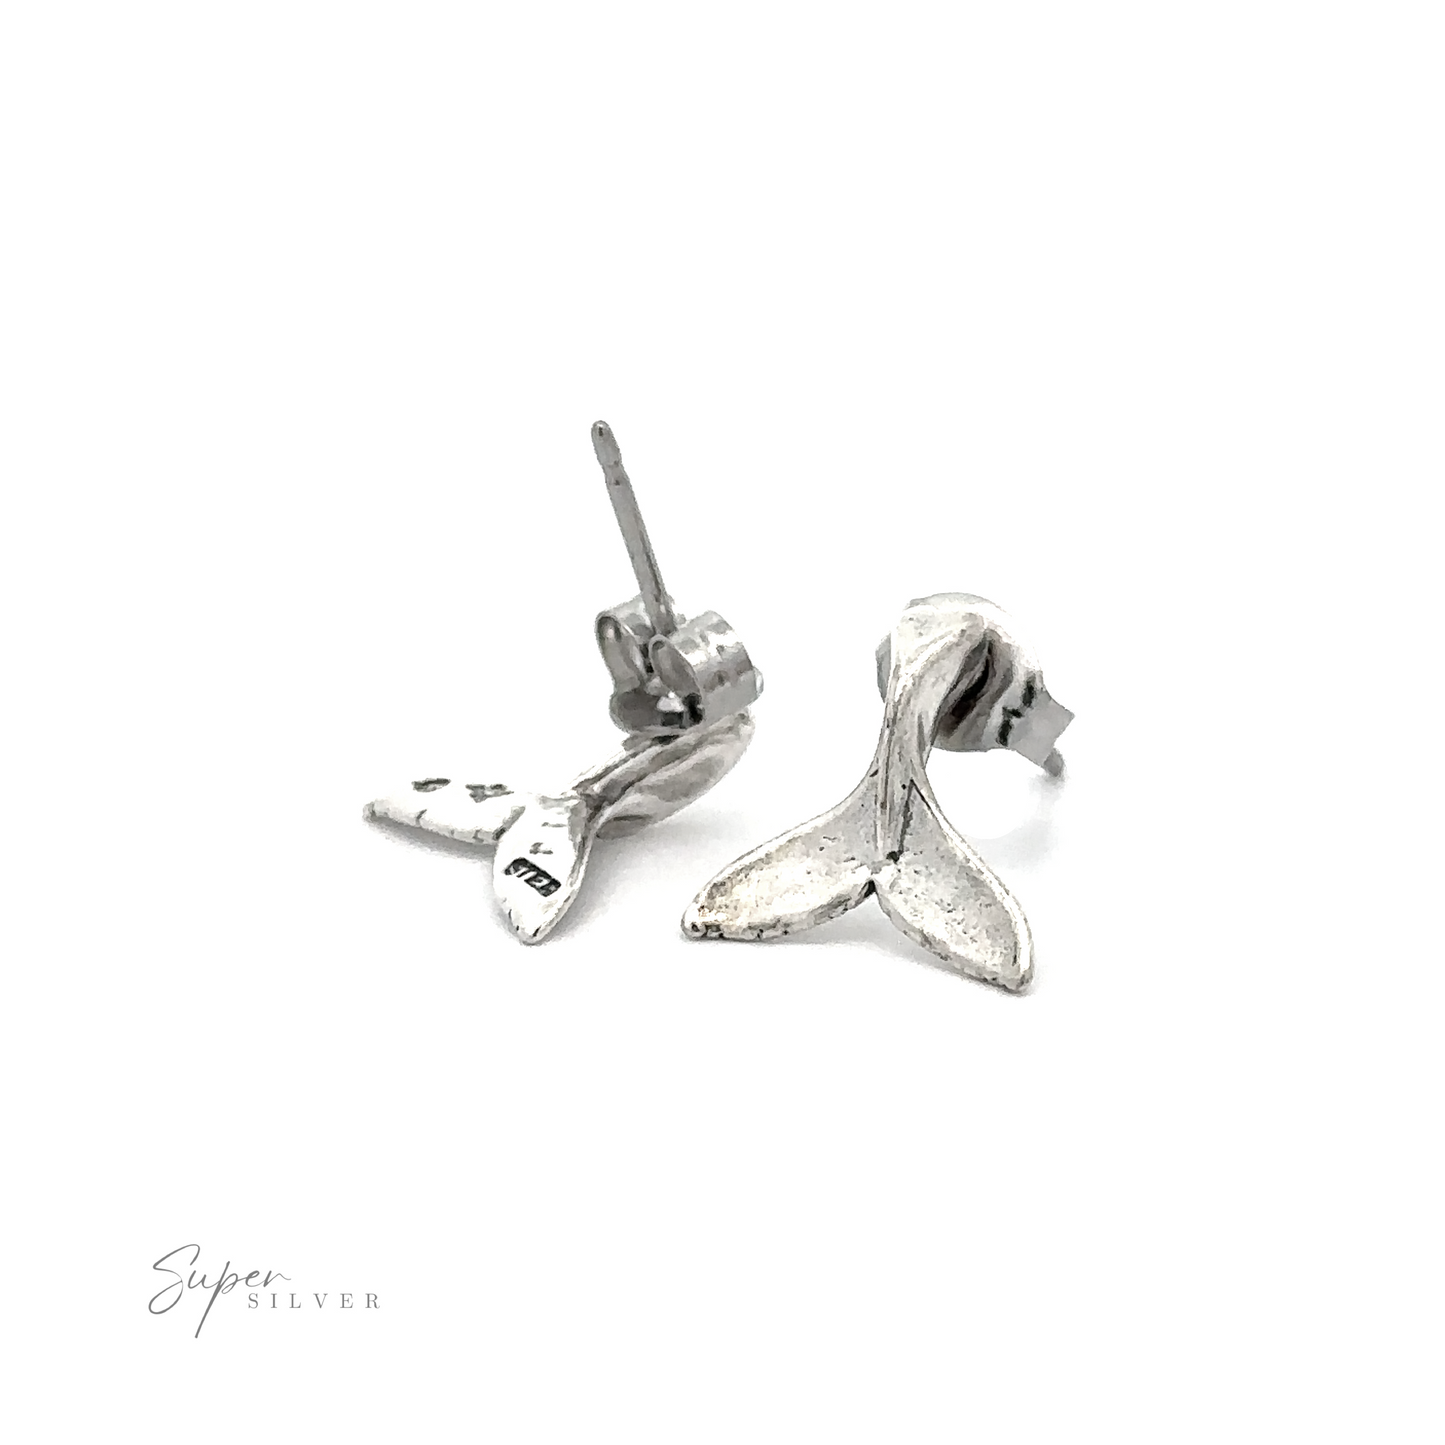 A pair of silver ocean-inspired Whale Tail Studs, perfect as a stylish accessory.